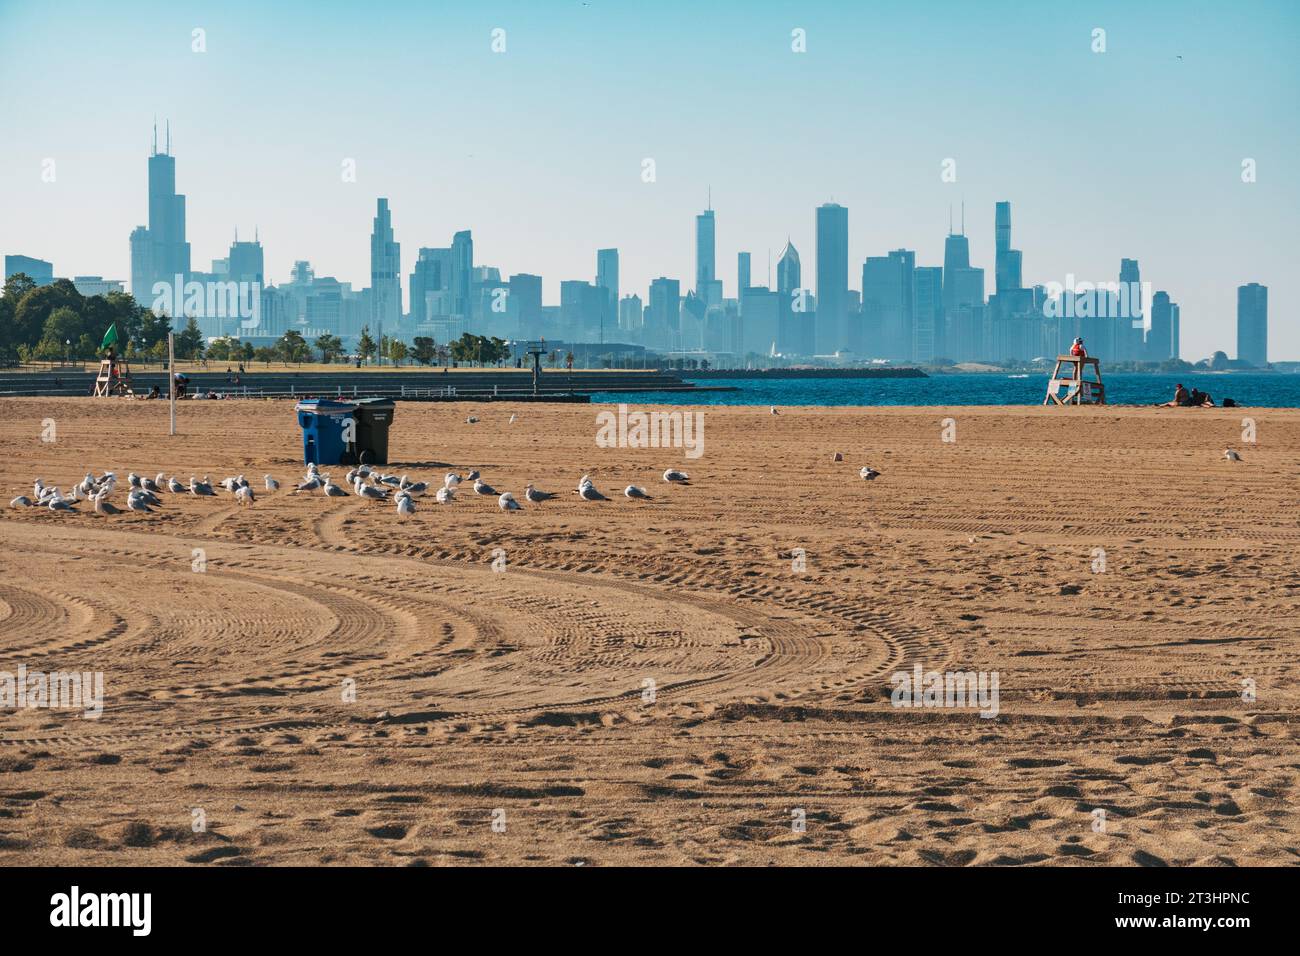 the Chicago skyline forms a backdrop for Oakwood Beach, on Lake Michigan, Chicago, United States Stock Photo